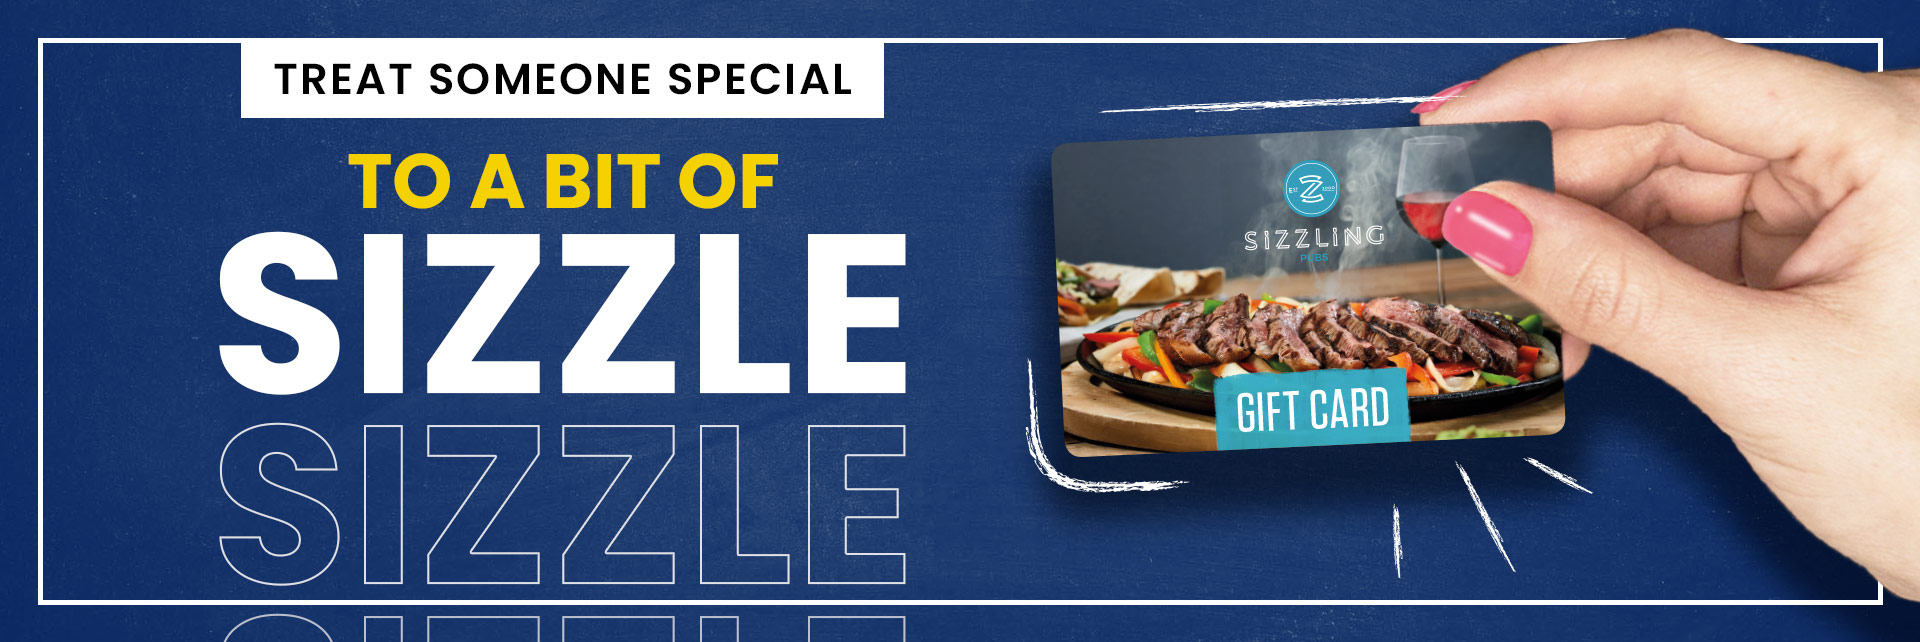 Sizzling Pubs Gift Card at The Beacon Tree in Dagenham